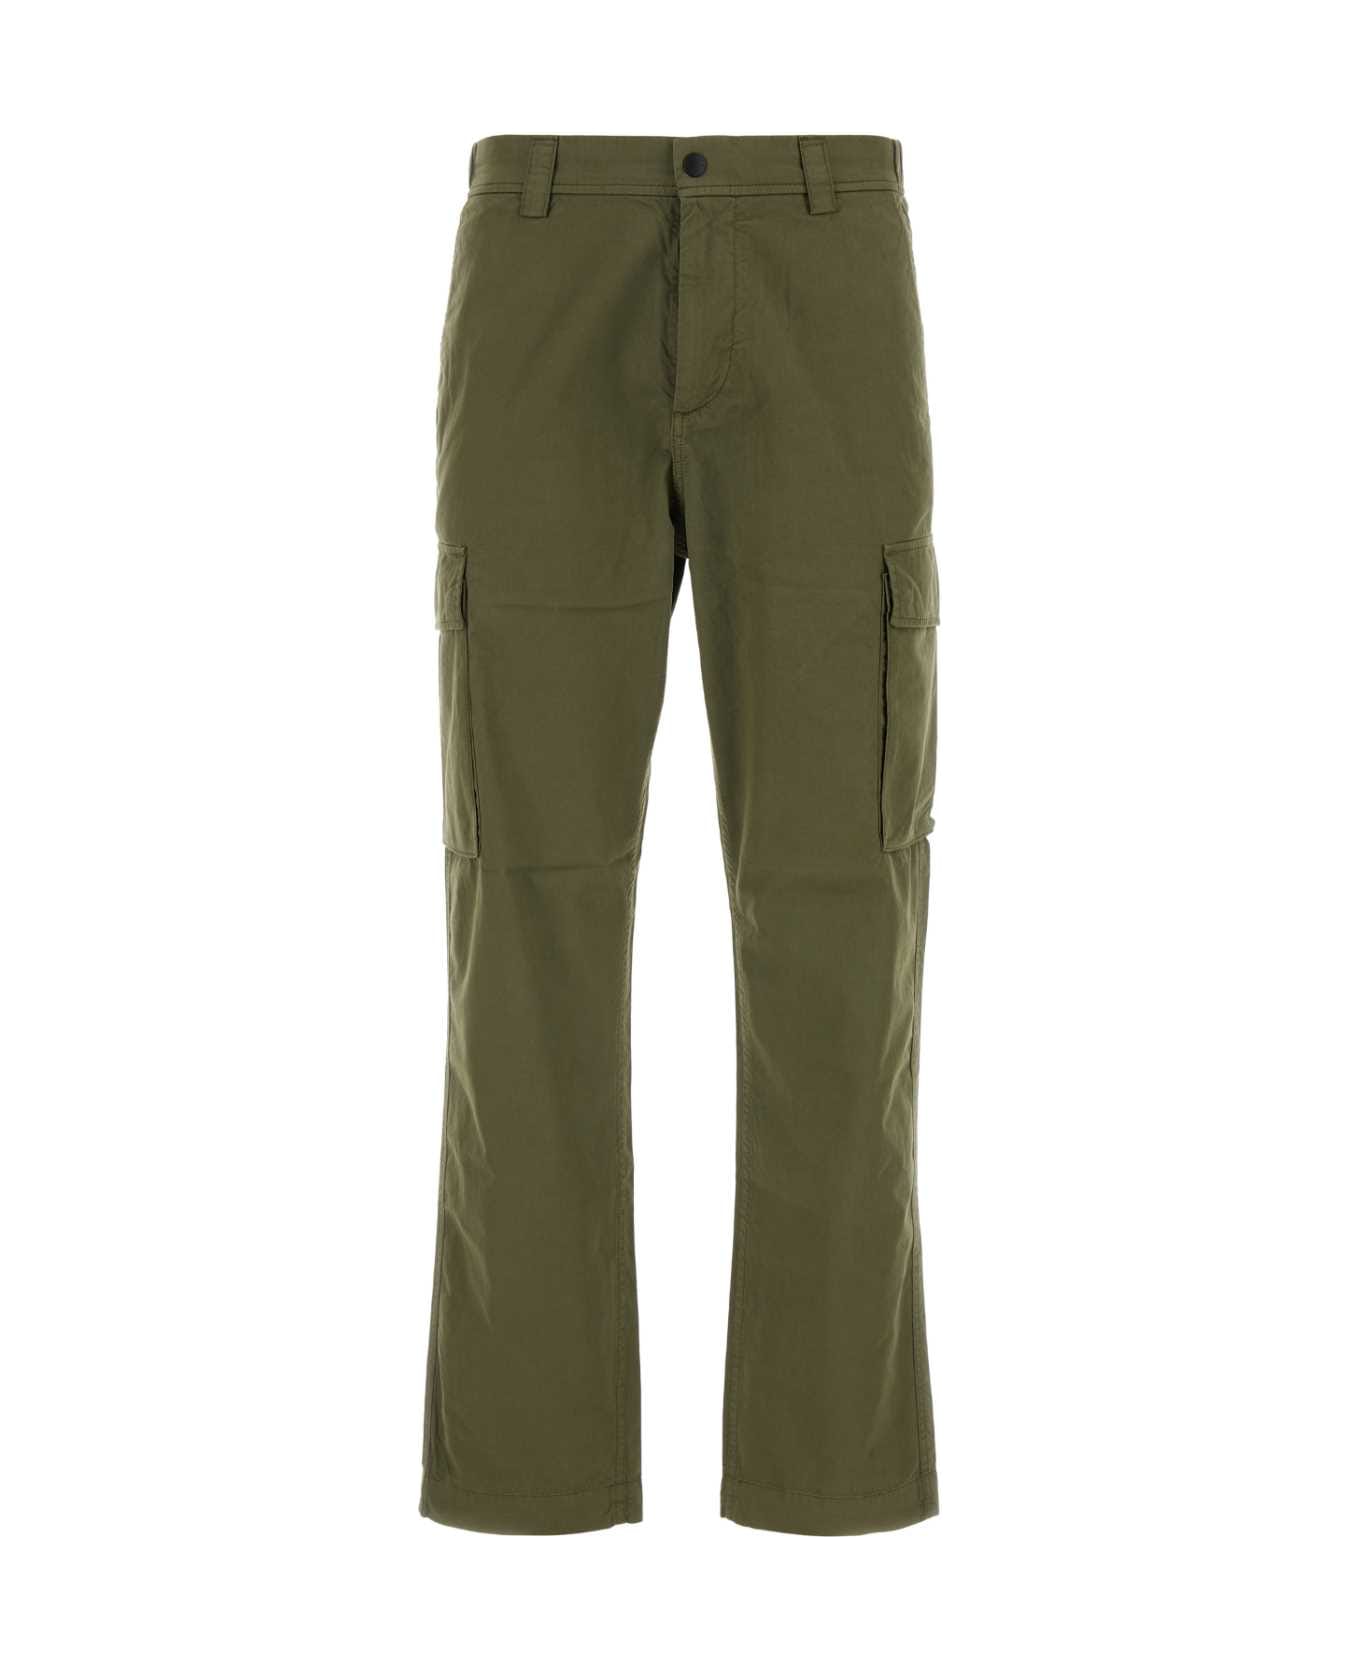 Woolrich Army Green Cotton Pant - 6178